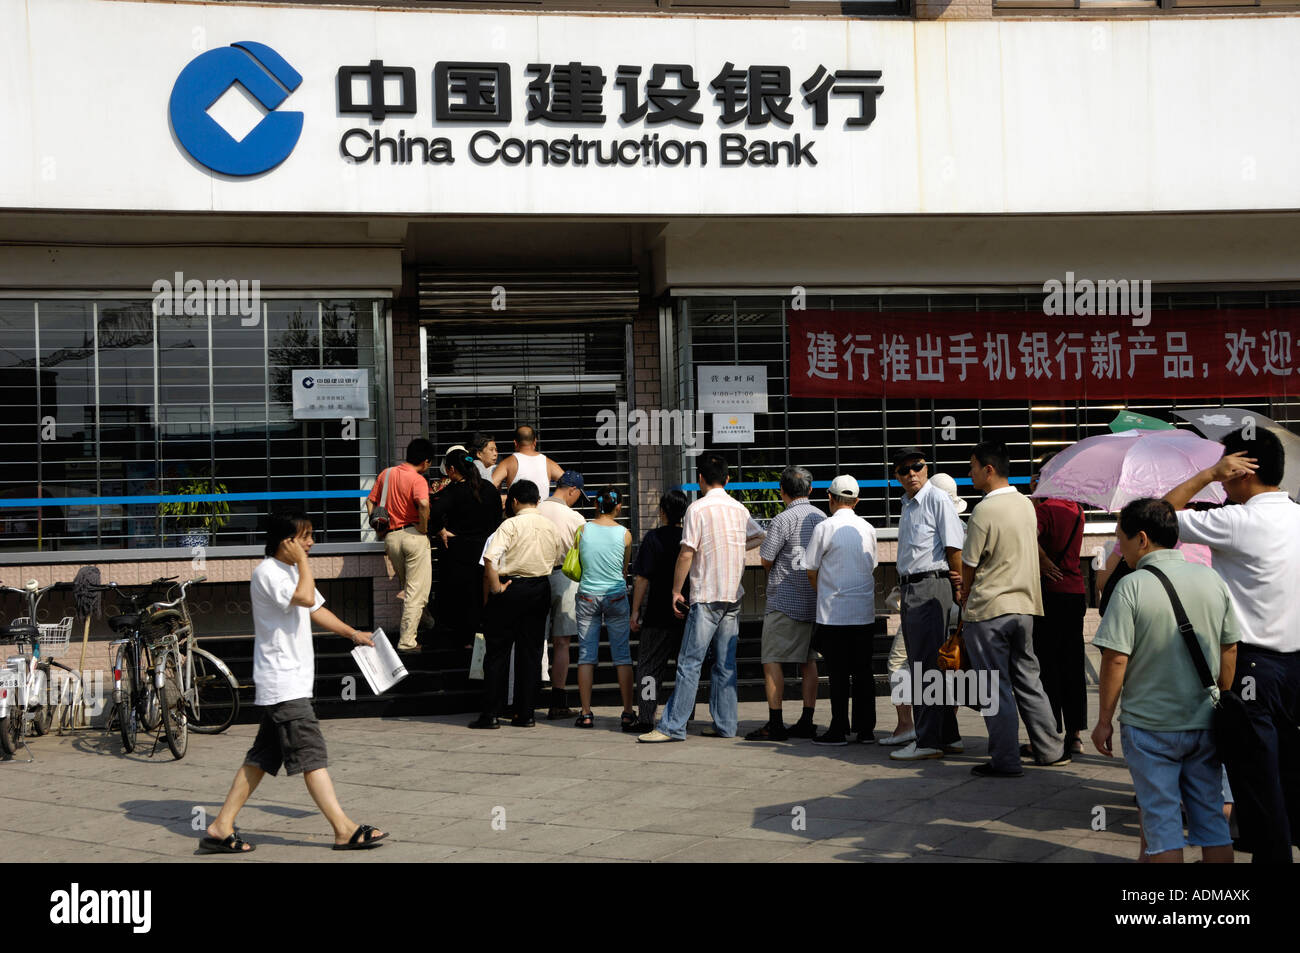 People line up to enter a China Construction Bank branch in the early morning Beijing China 15 Aug 2007 Stock Photo